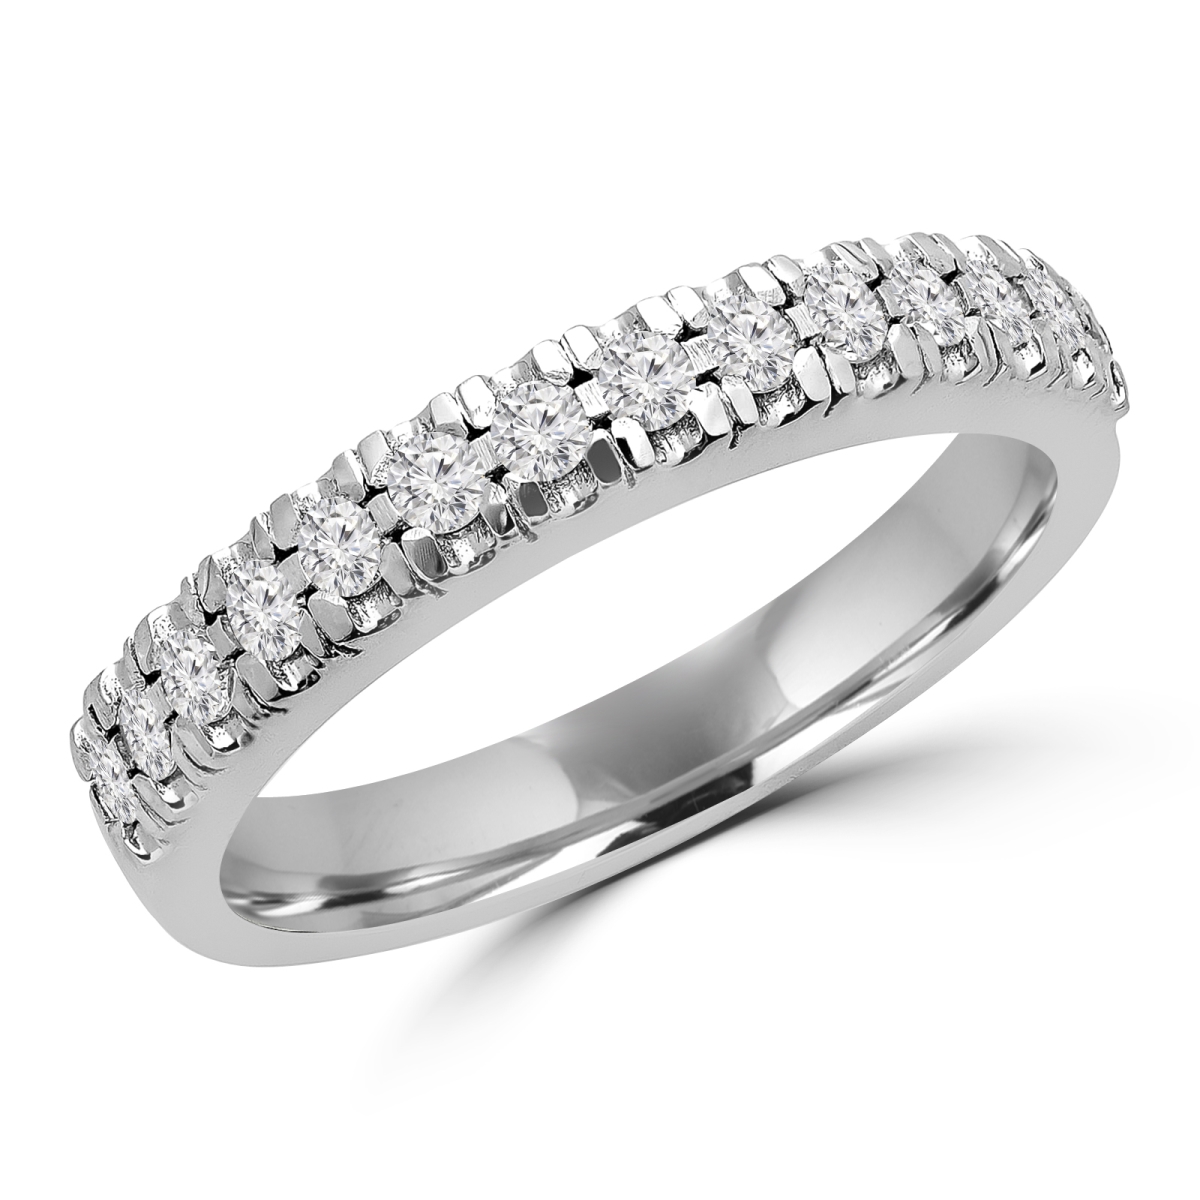 Picture of Majesty Diamonds MD170257-7.75 0.33 CTW Round Diamond Semi-Eternity Wedding Band Ring in 14K White Gold - Size 7.75